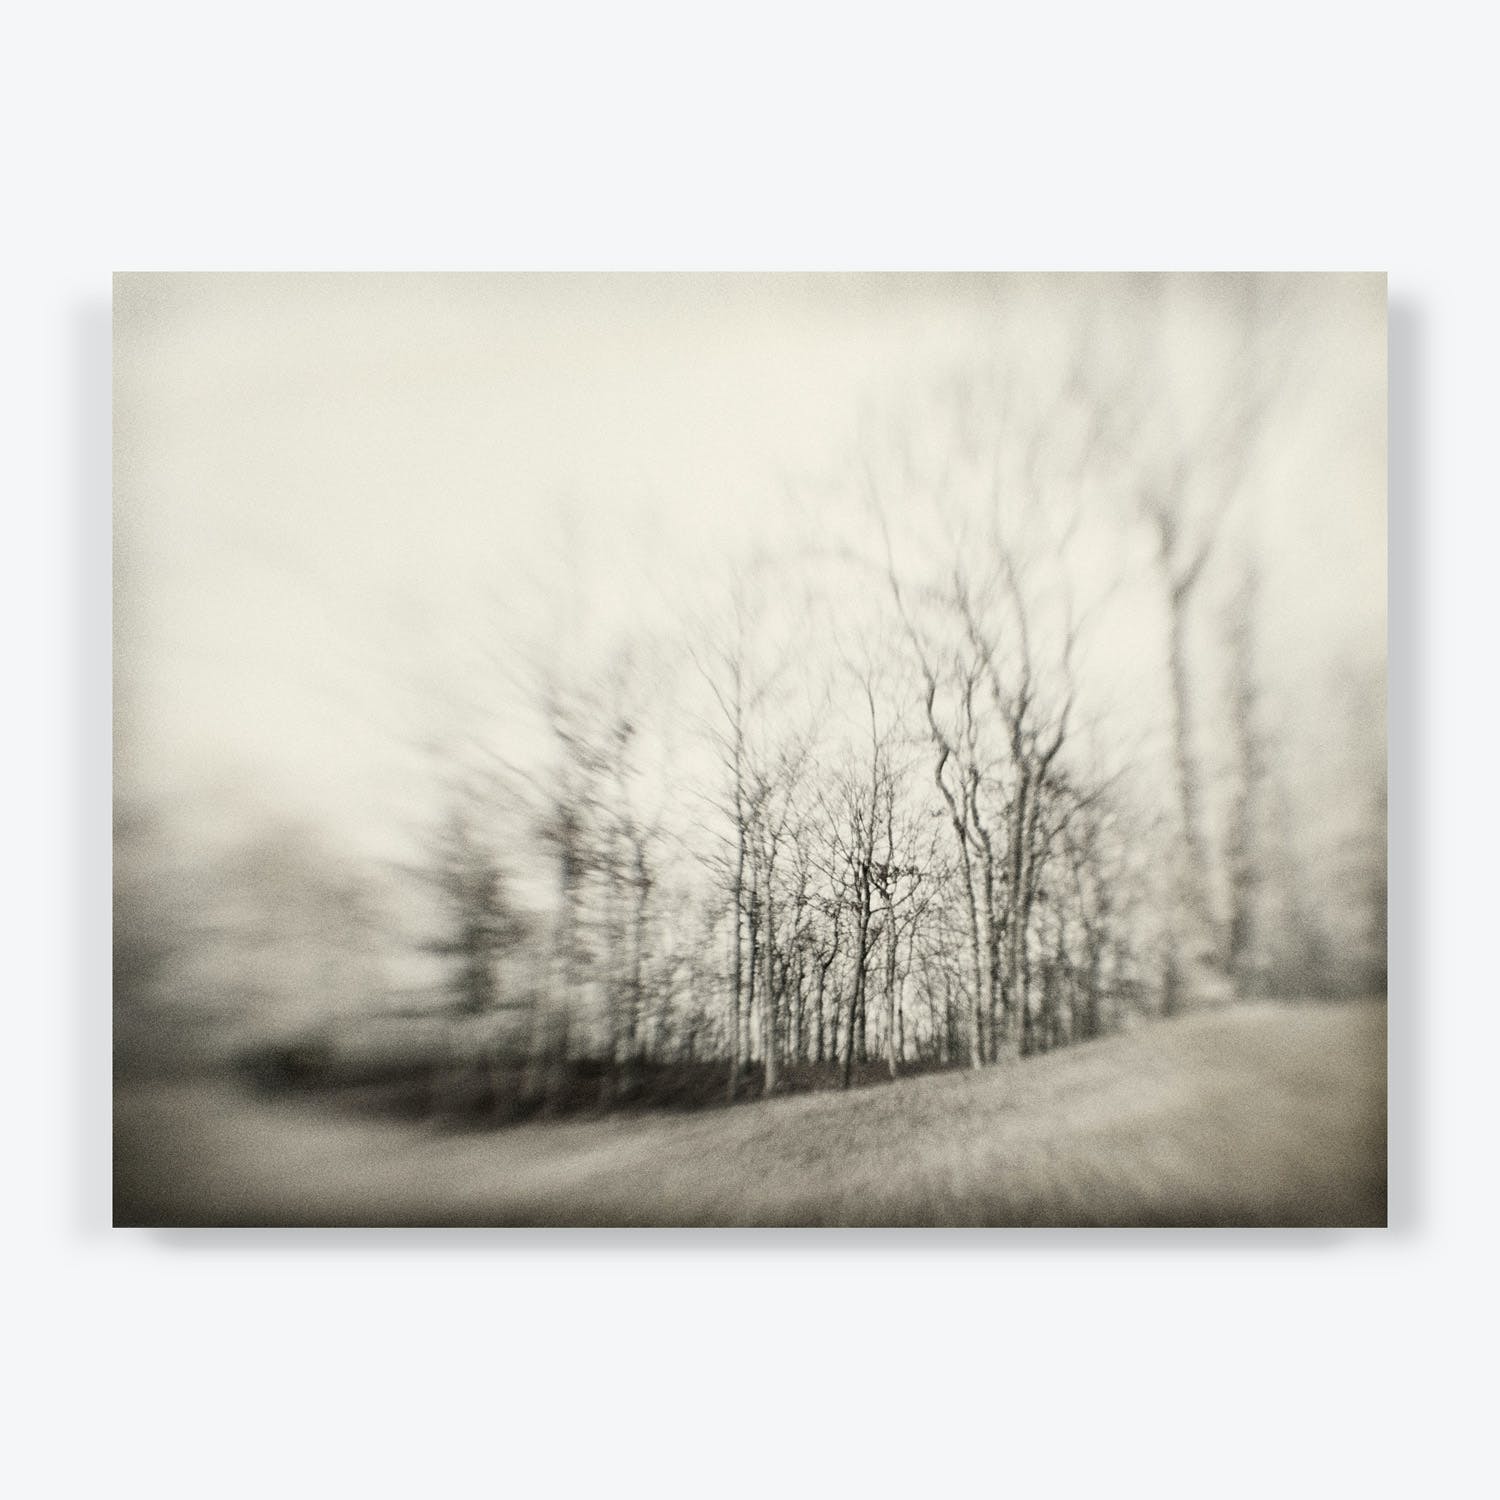 Ethereal monochromatic landscape with swirling focus depicts passing of time.